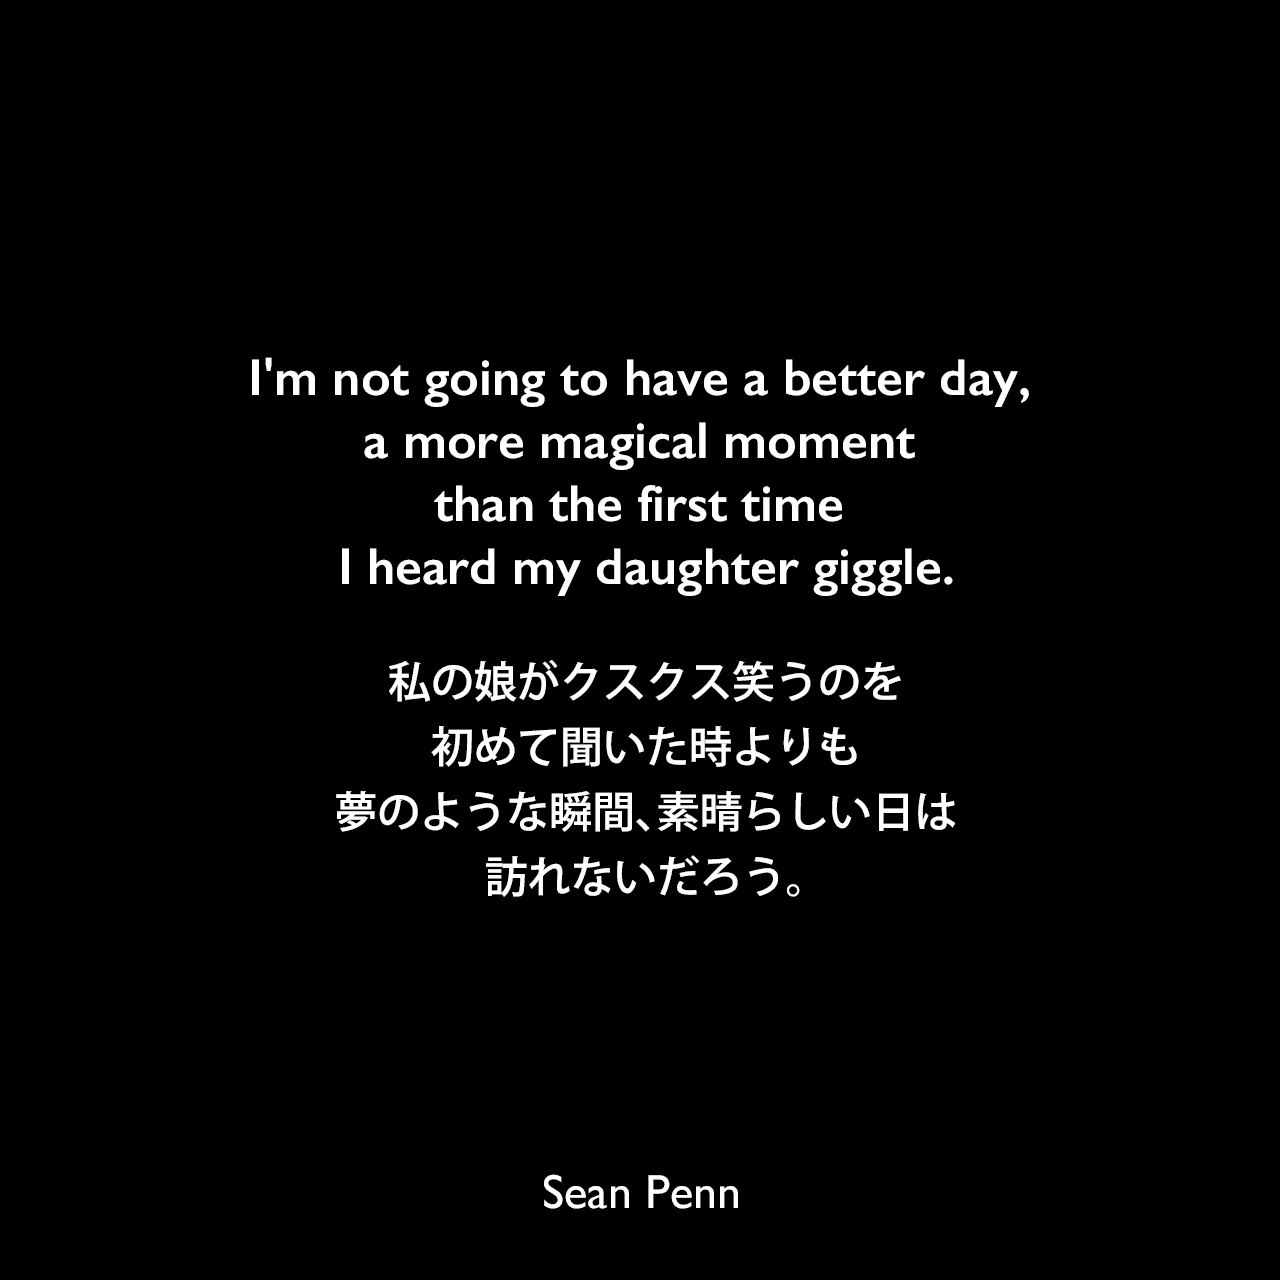 I'm not going to have a better day, a more magical moment than the first time I heard my daughter giggle.私の娘がクスクス笑うのを初めて聞いた時よりも、夢のような瞬間、素晴らしい日は訪れないだろう。Sean Penn